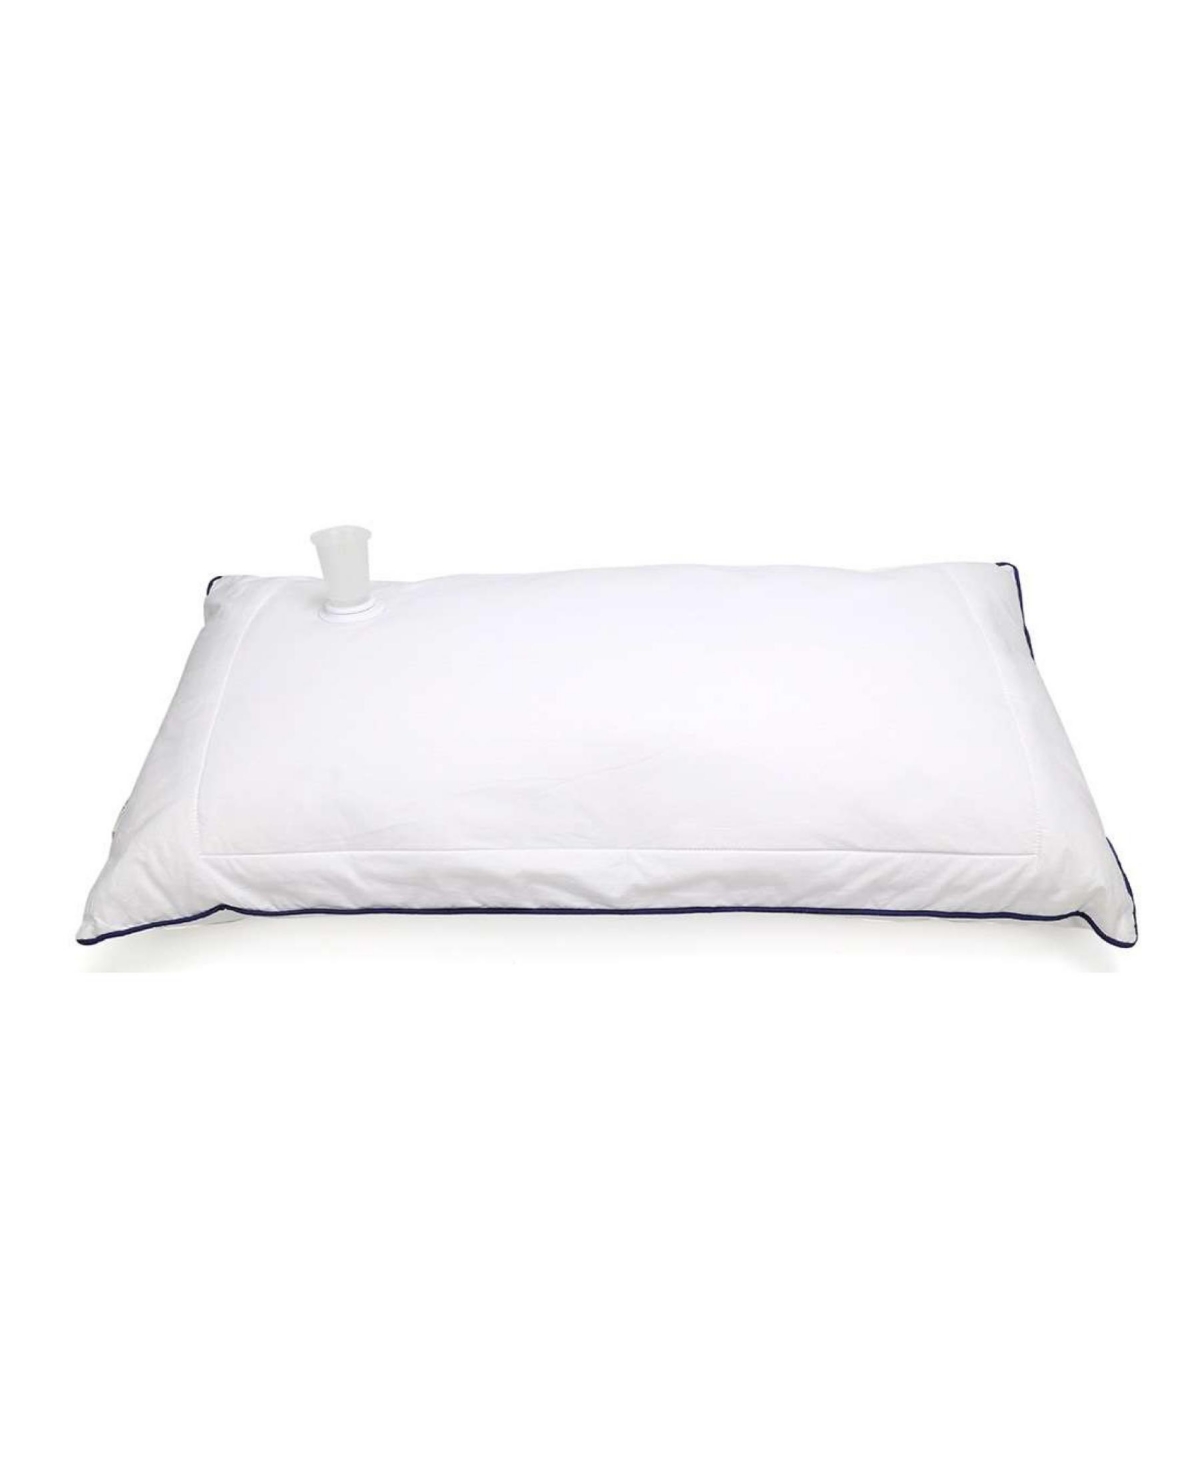 Dr Pillow Water Pillow In White